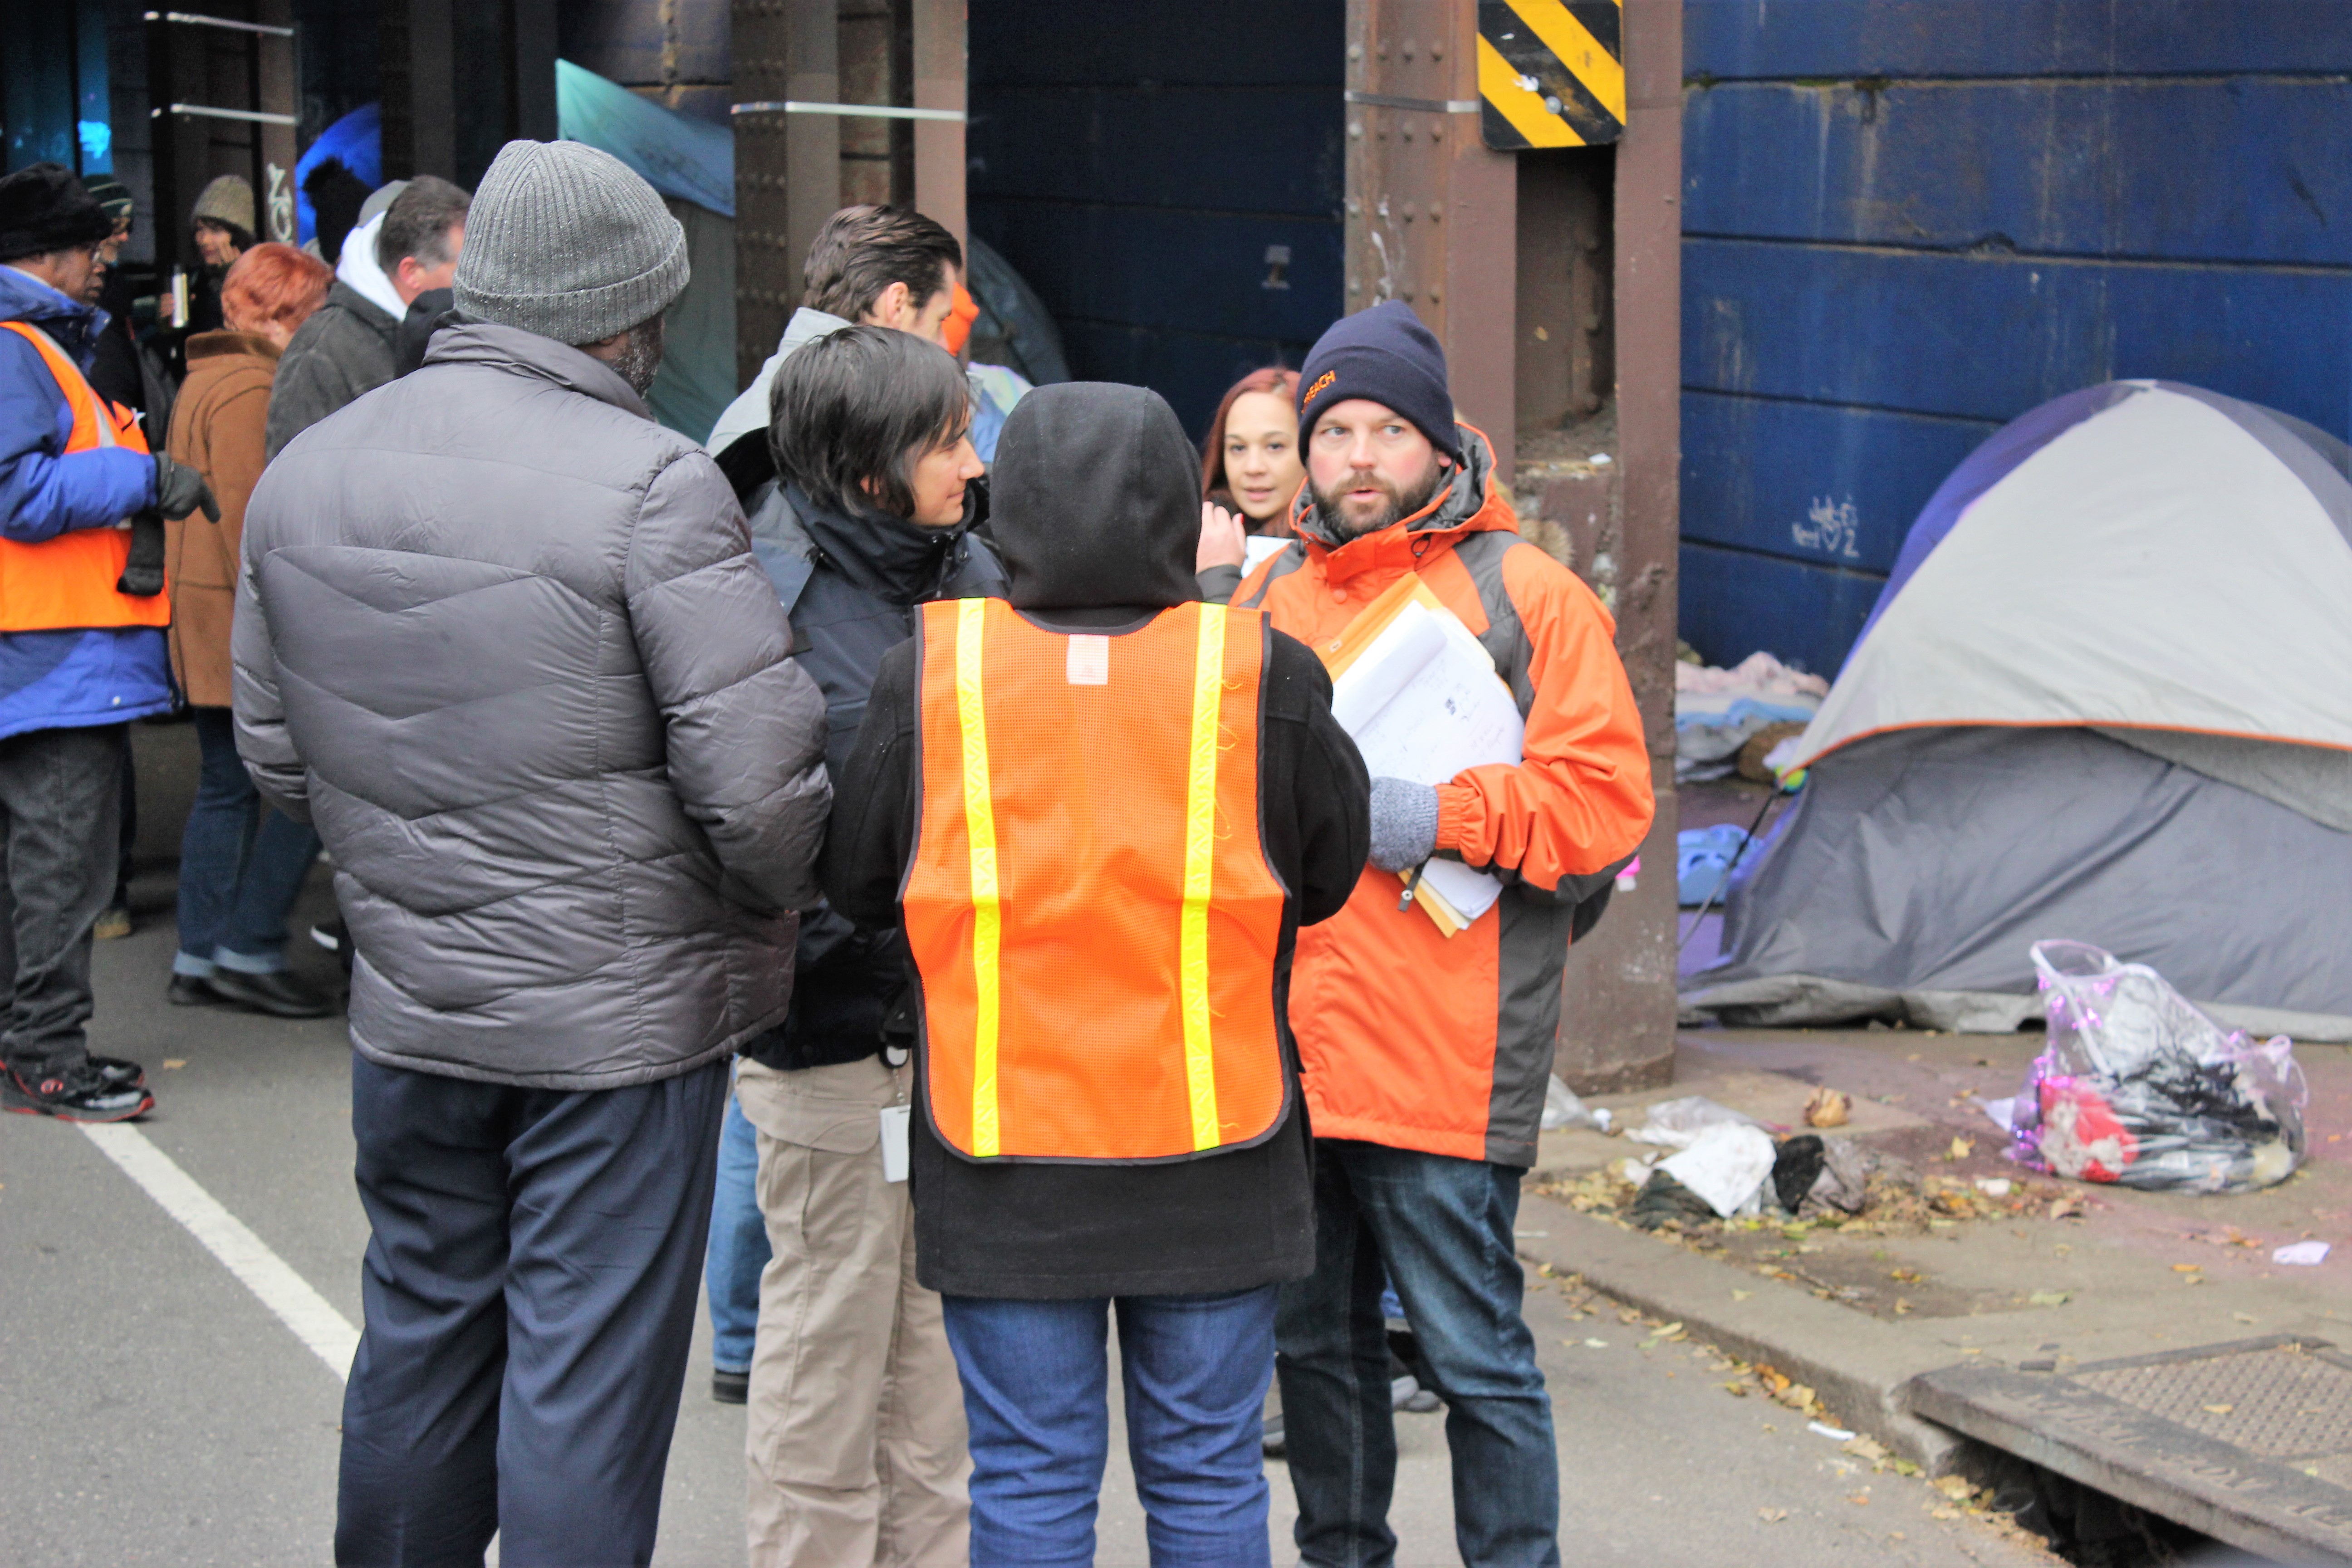 People standing in a group outside, with winter coats and orange vests, in front of a tent and plastic bags.